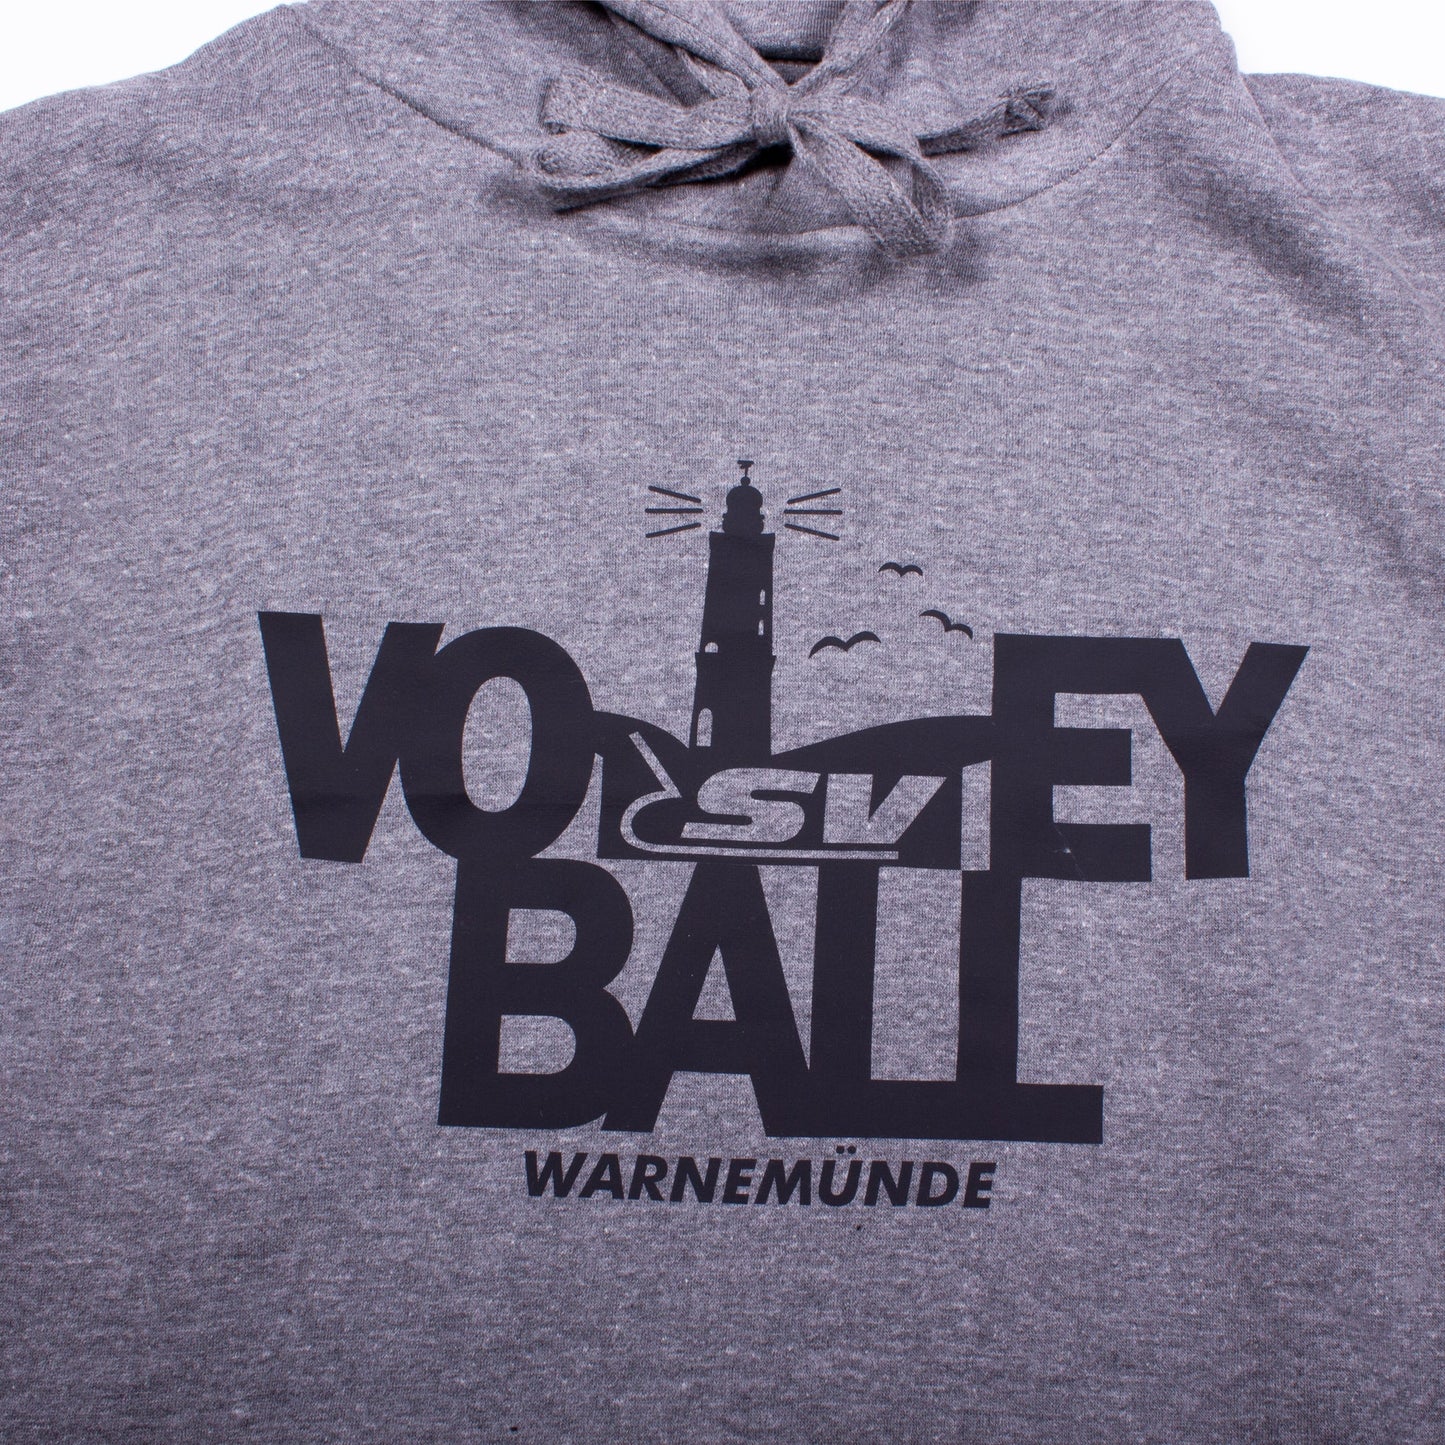 SVW Hoodie - Volleyball